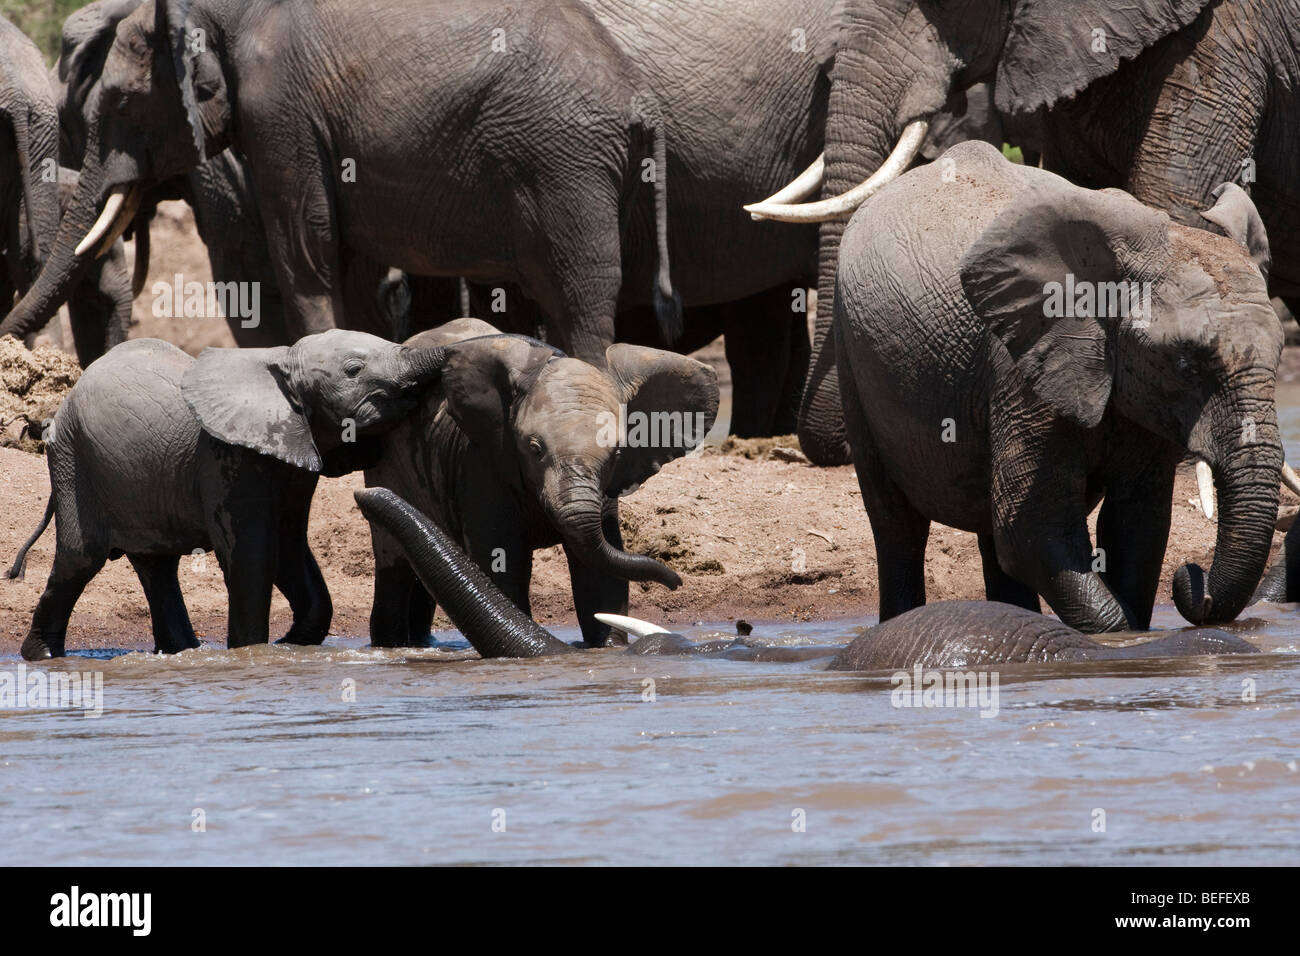 2 funny baby elephants playing together in river flapping ears out with bathing adult, elephant herd background, Masai Mara Kenya Africa Stock Photo